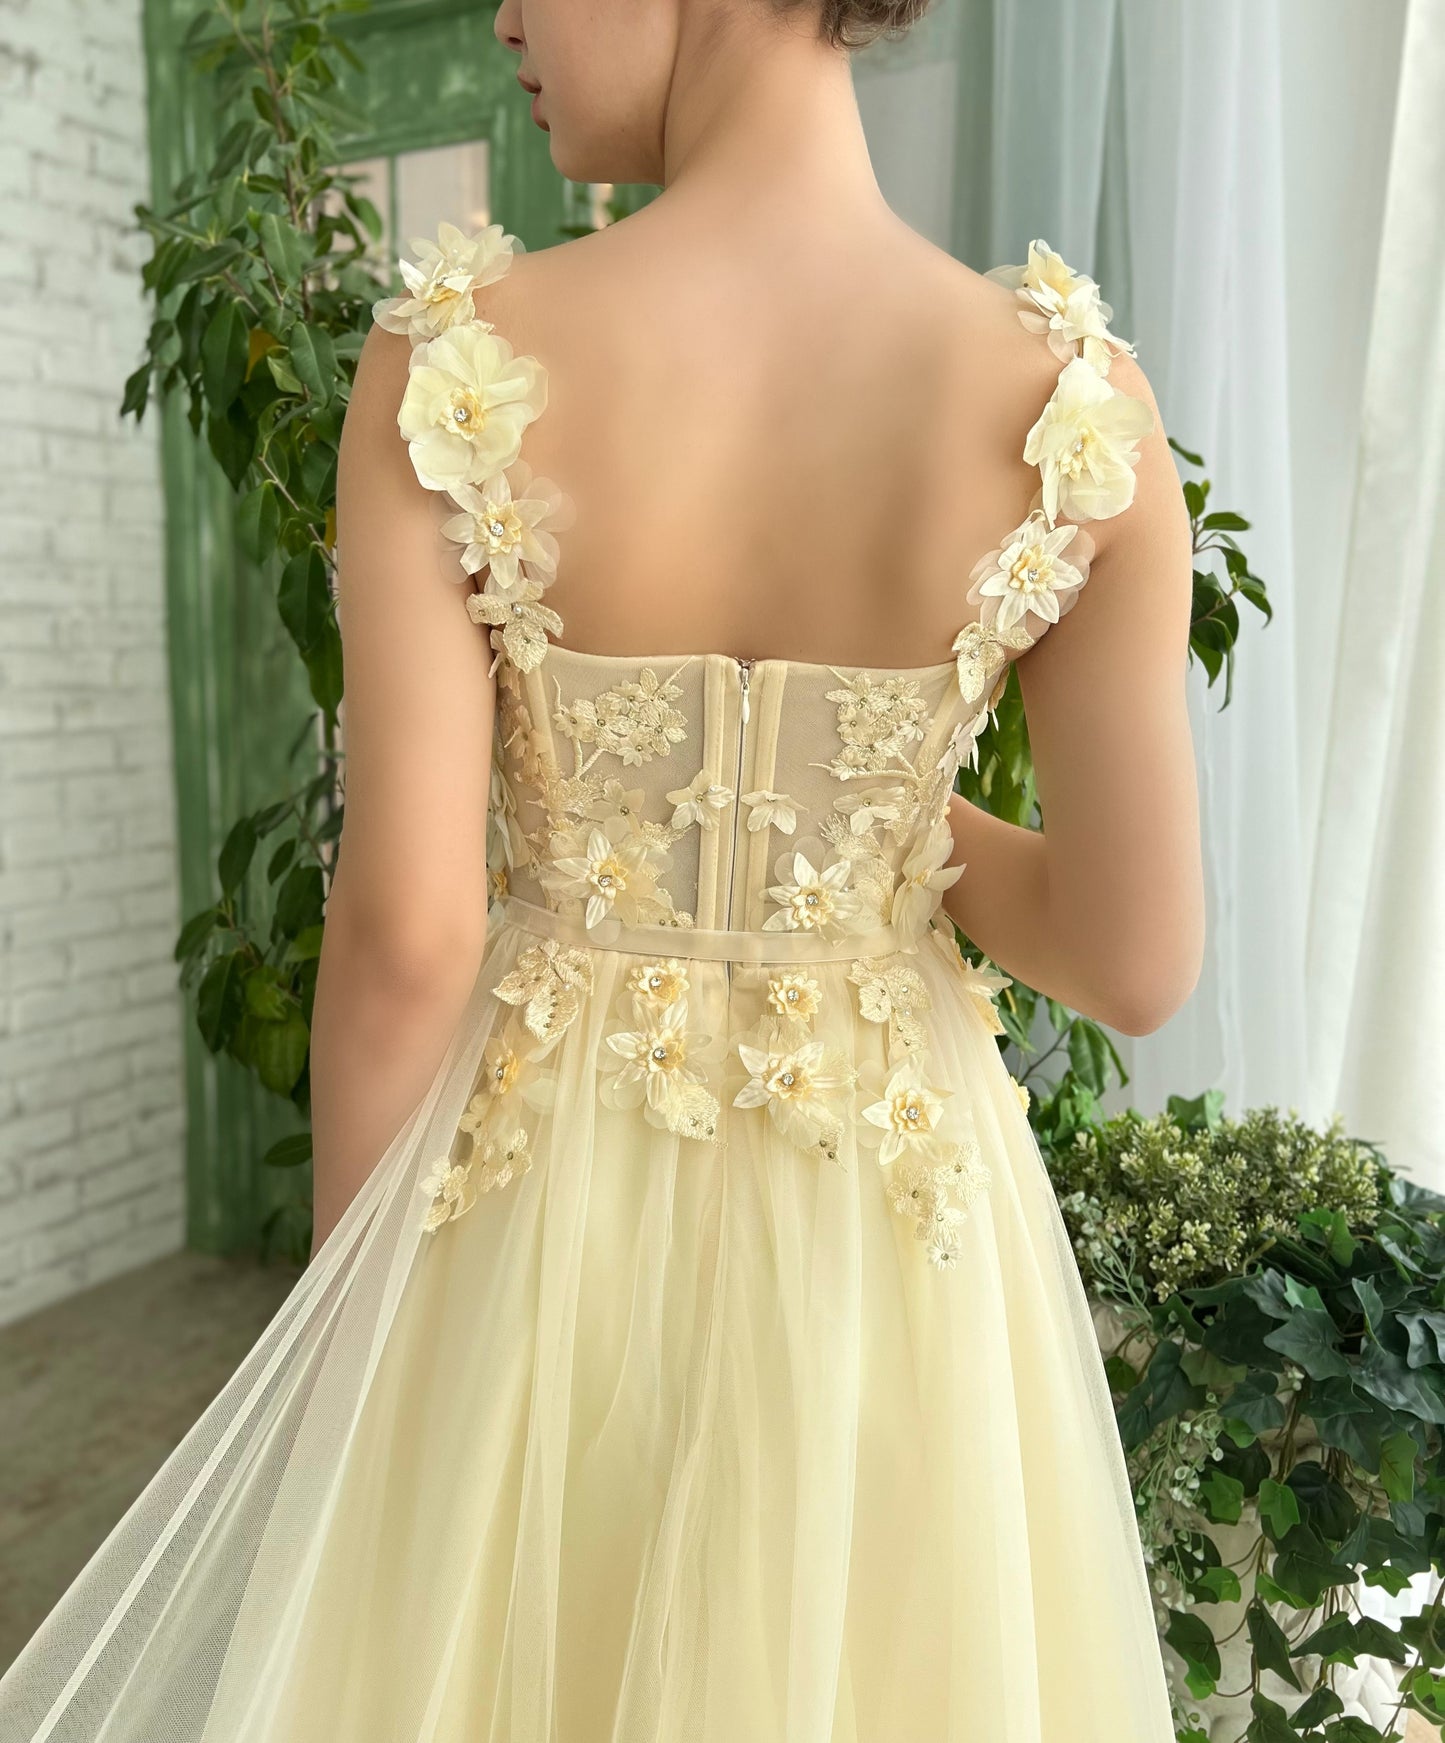 Yellow A-Line dress with straps, embroidery and flowers